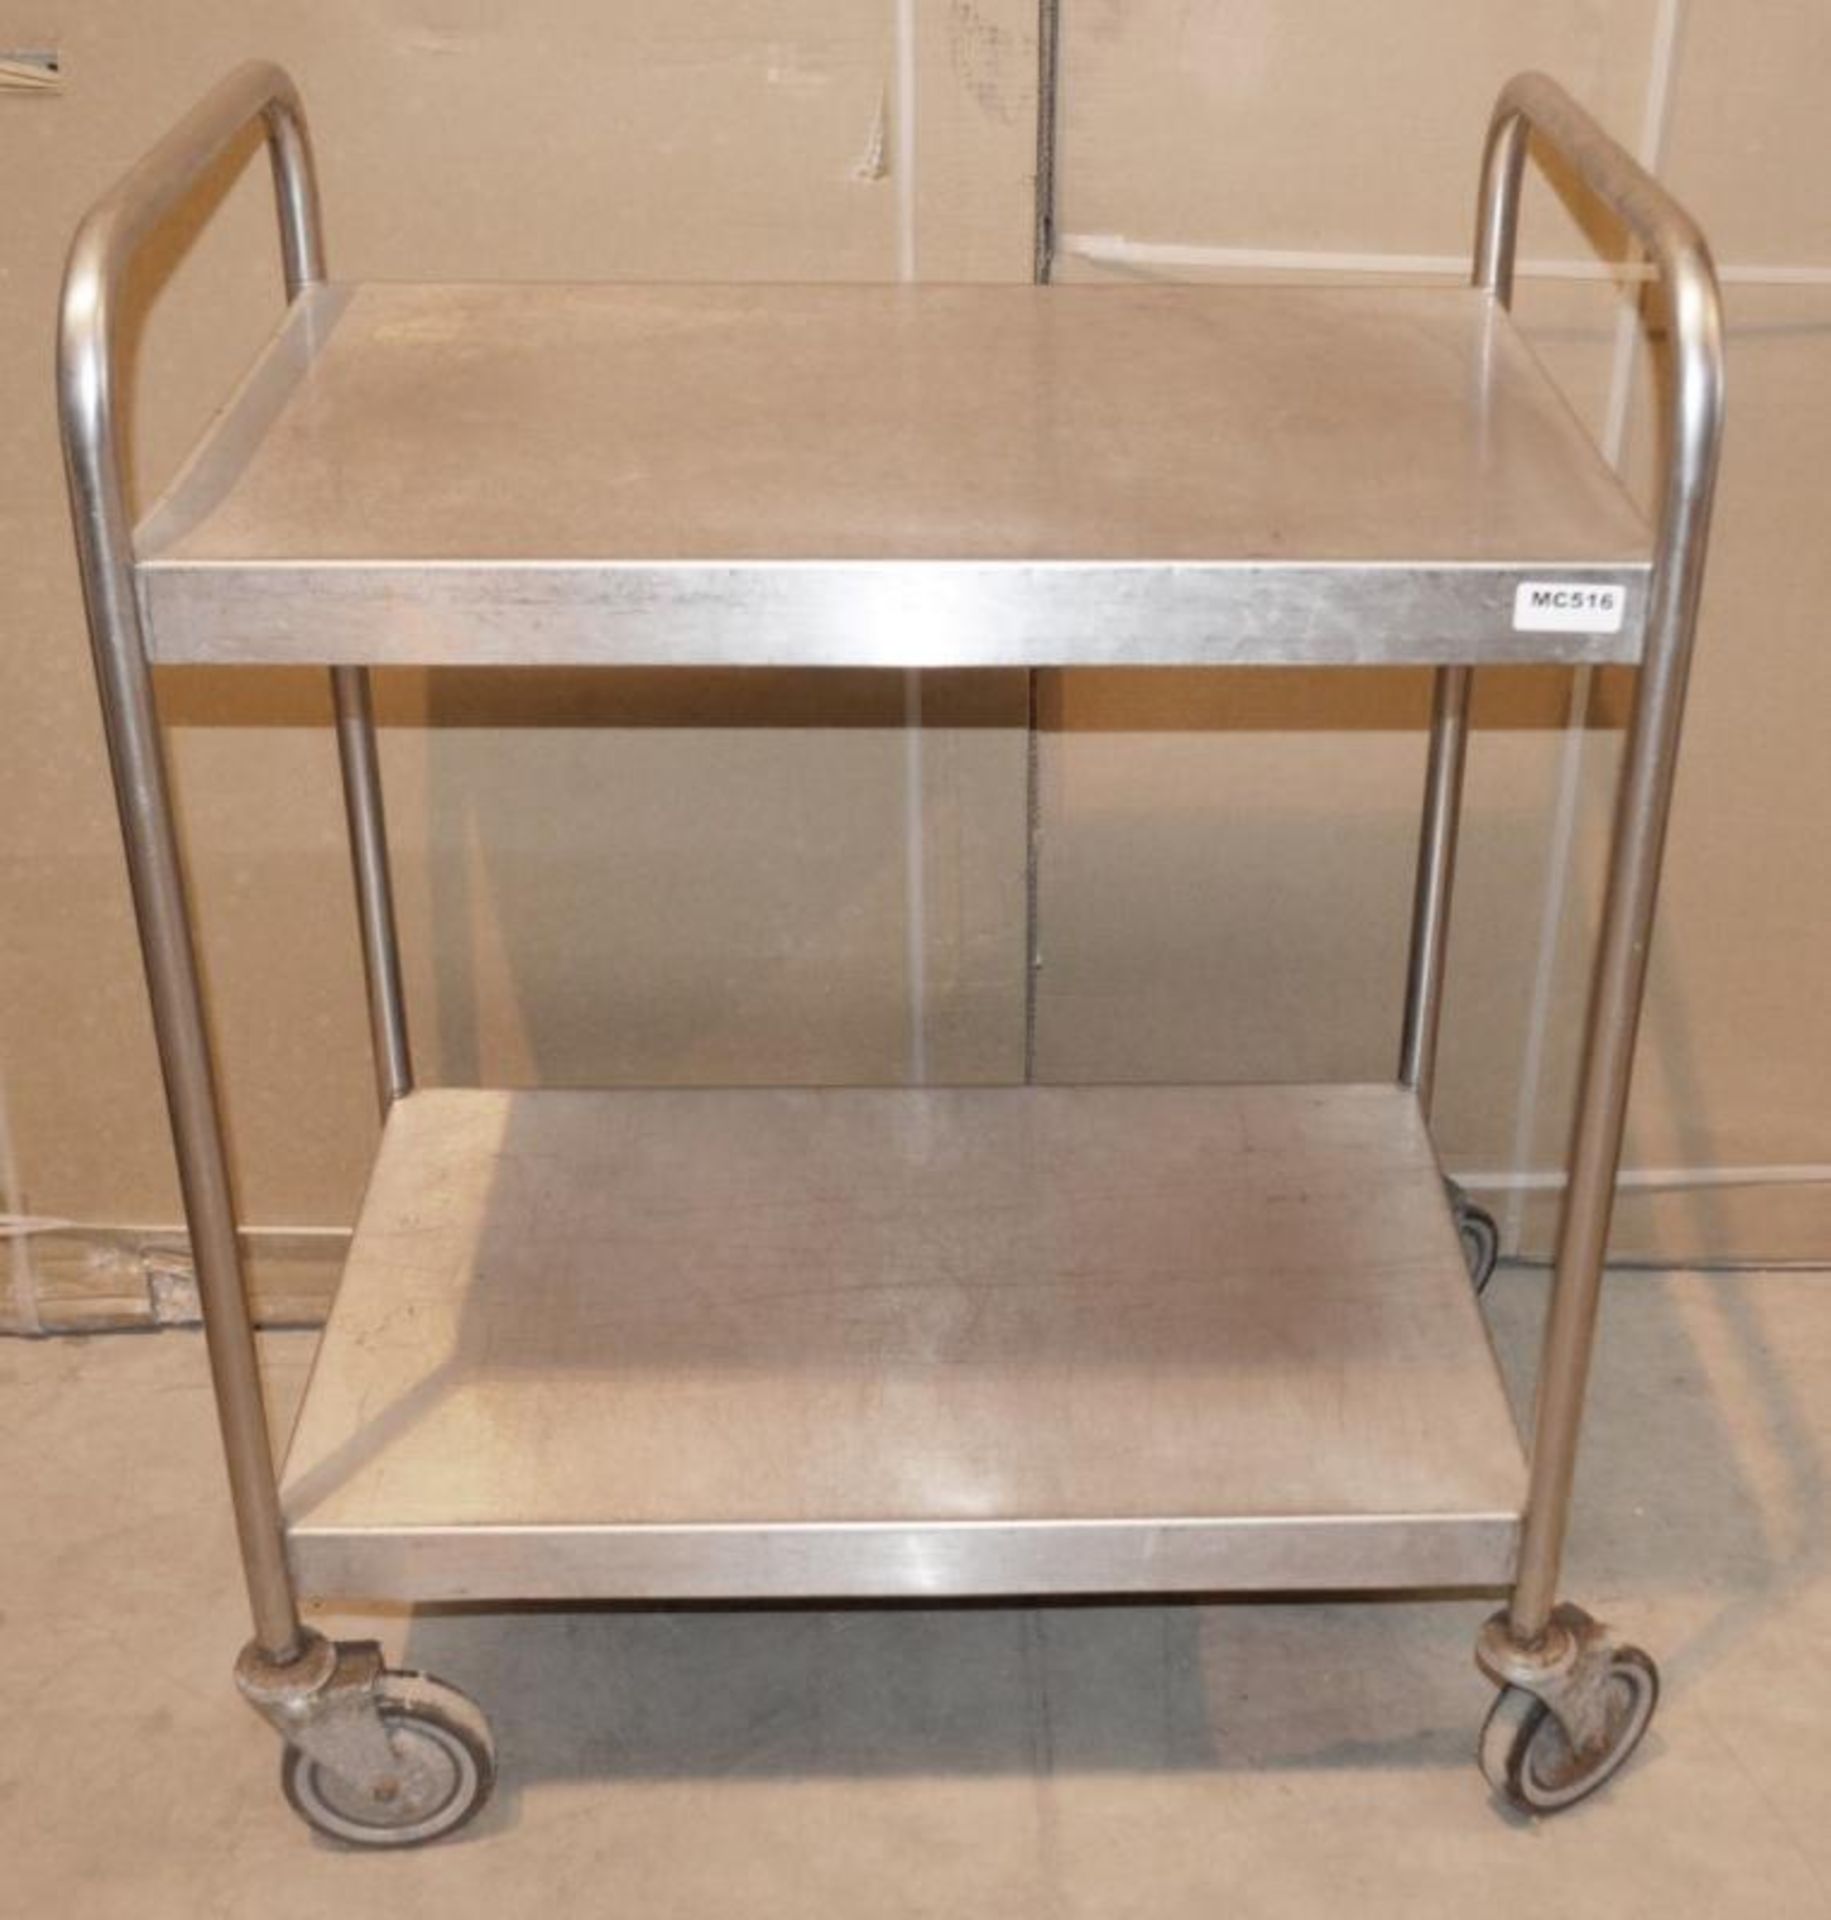 1 x Stainless Steel Commercial Kitchen 2-Teir Trolley On Castors - Dimensions: W74 x D48 x H95cm - V